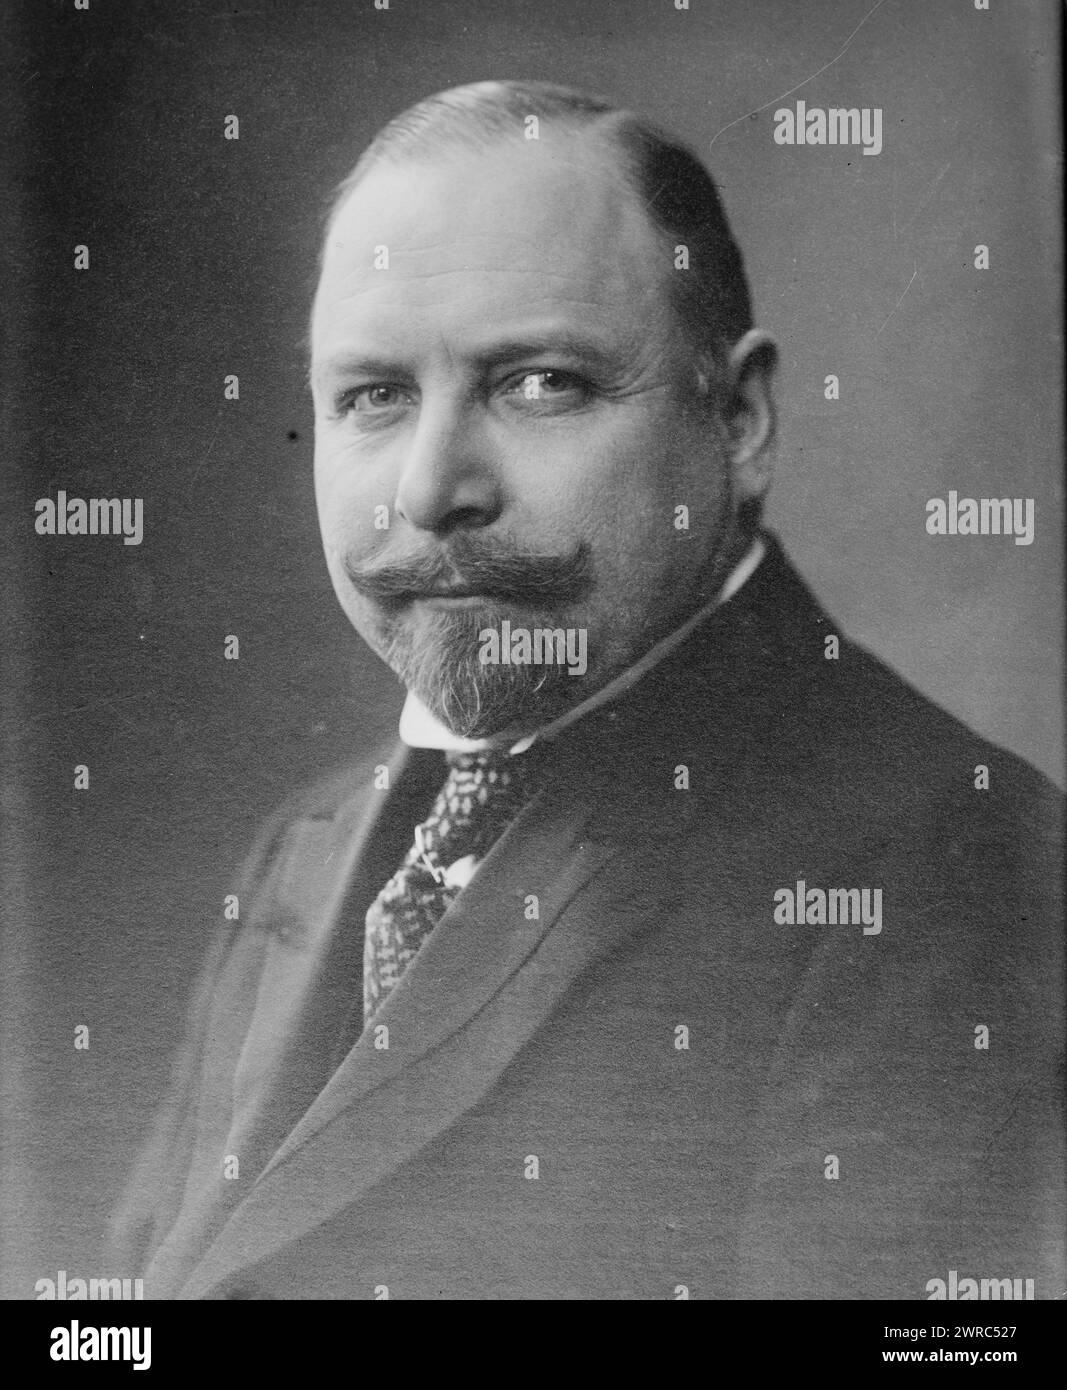 C. Th. Zahle, Photograph shows Carl Theodor Zahle (1866-1946), a Danish lawyer and politician who served as prime minister of Denmark from 1909-1910 and from 1913-1920., between ca. 1915 and ca. 1920, Glass negatives, 1 negative: glass Stock Photo